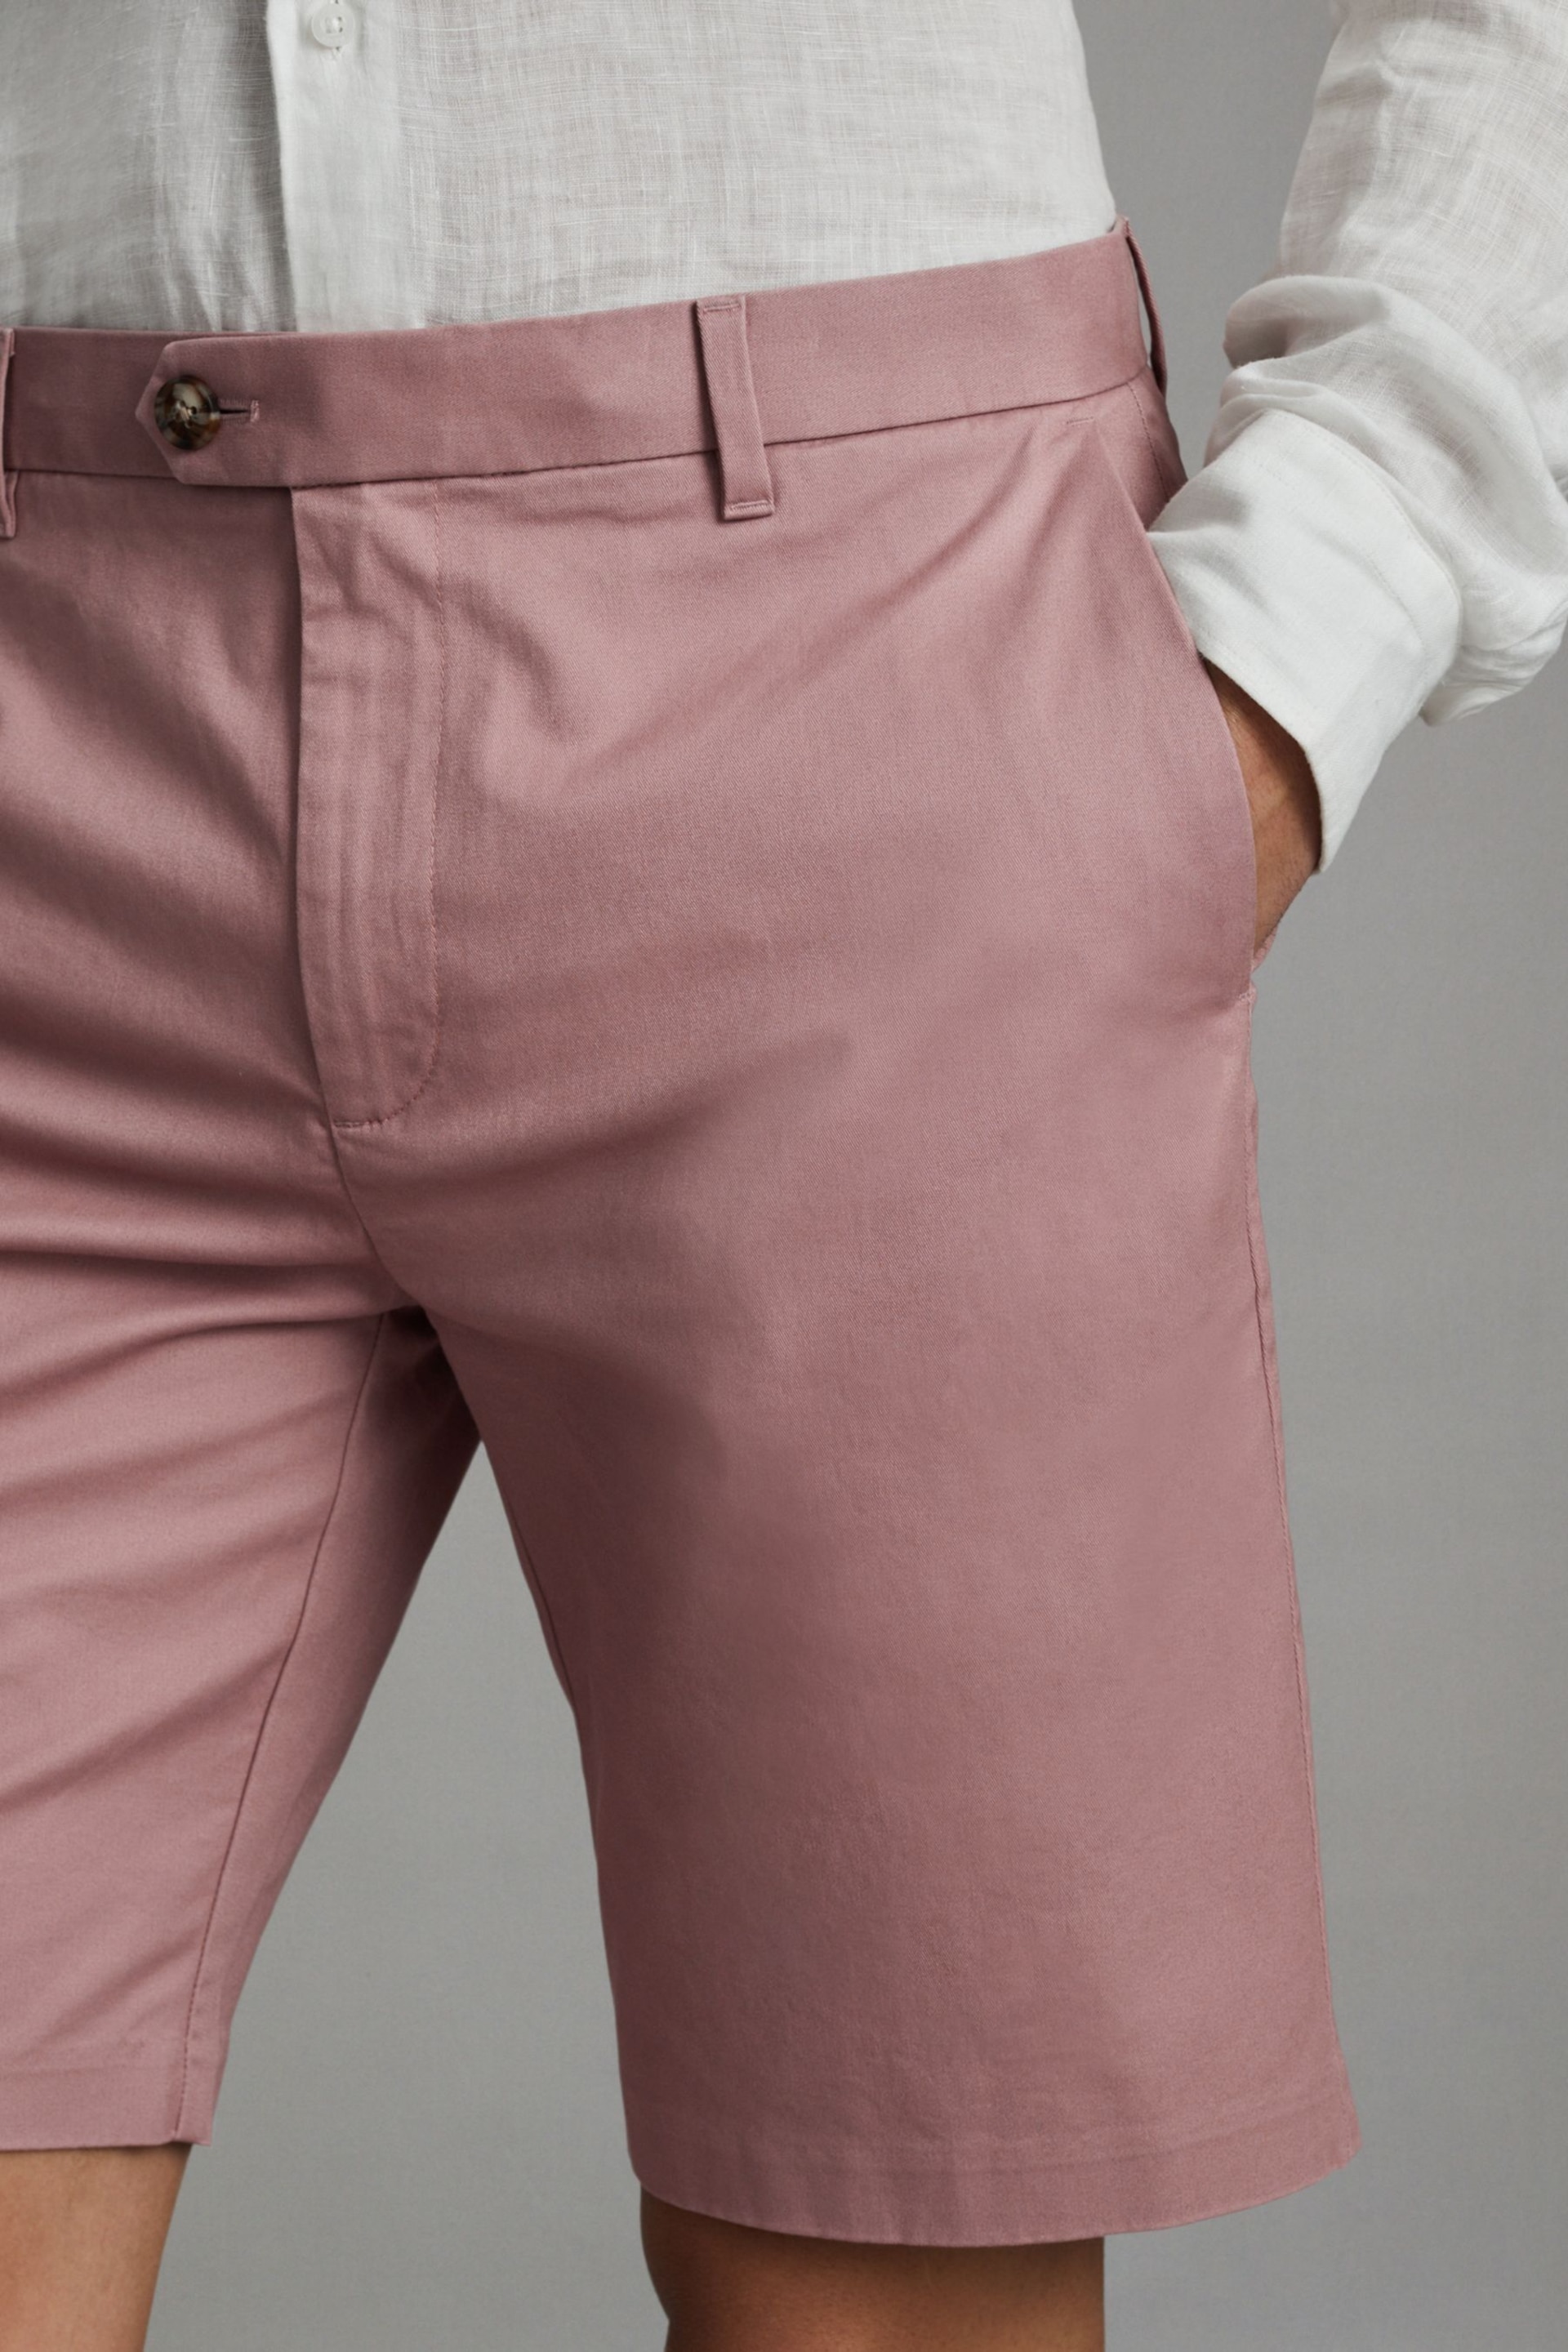 Reiss Dusty Pink Wicket Modern Fit Cotton Blend Chino Shorts - Image 4 of 7